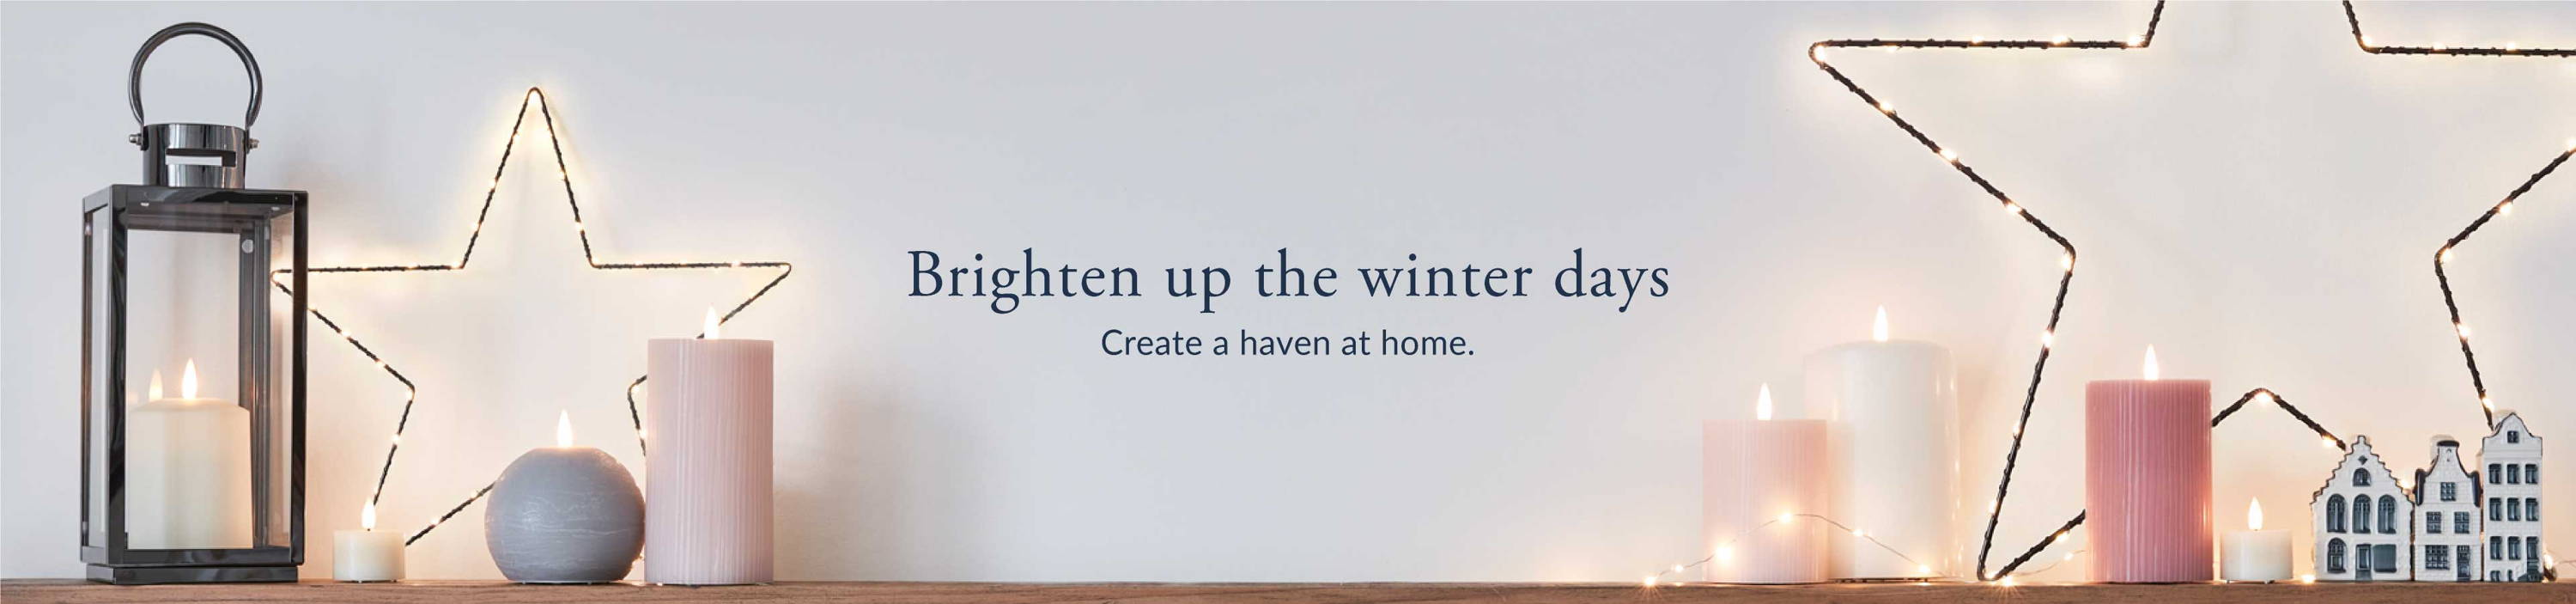 Brighten up the winter days banner with osby stars, LED candles, a black lantern and fairy lights. Text reads: create a haven at home.